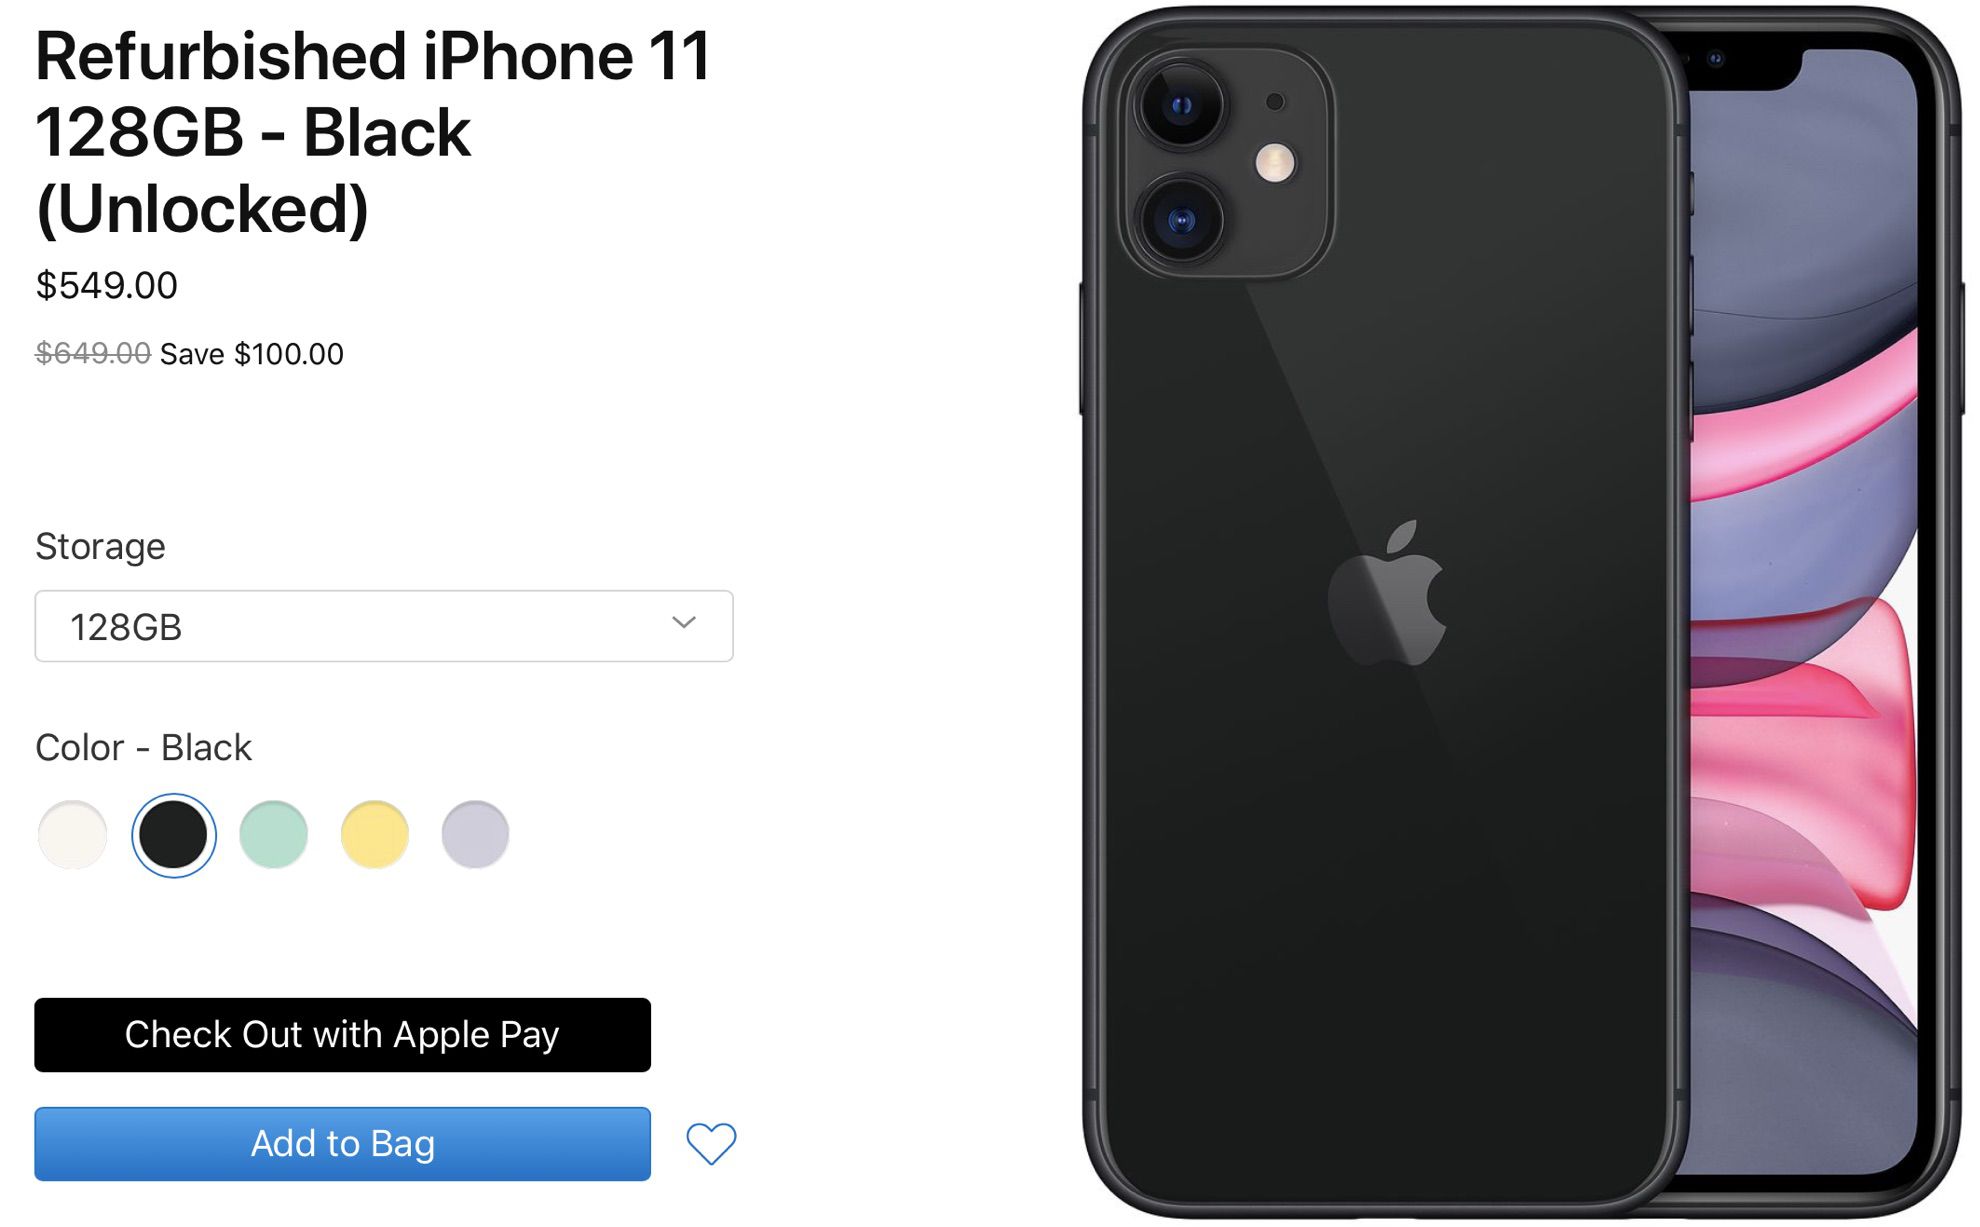 Apple is now selling refurbished iPhone 11, 11 Pro and 11 Pro Max models